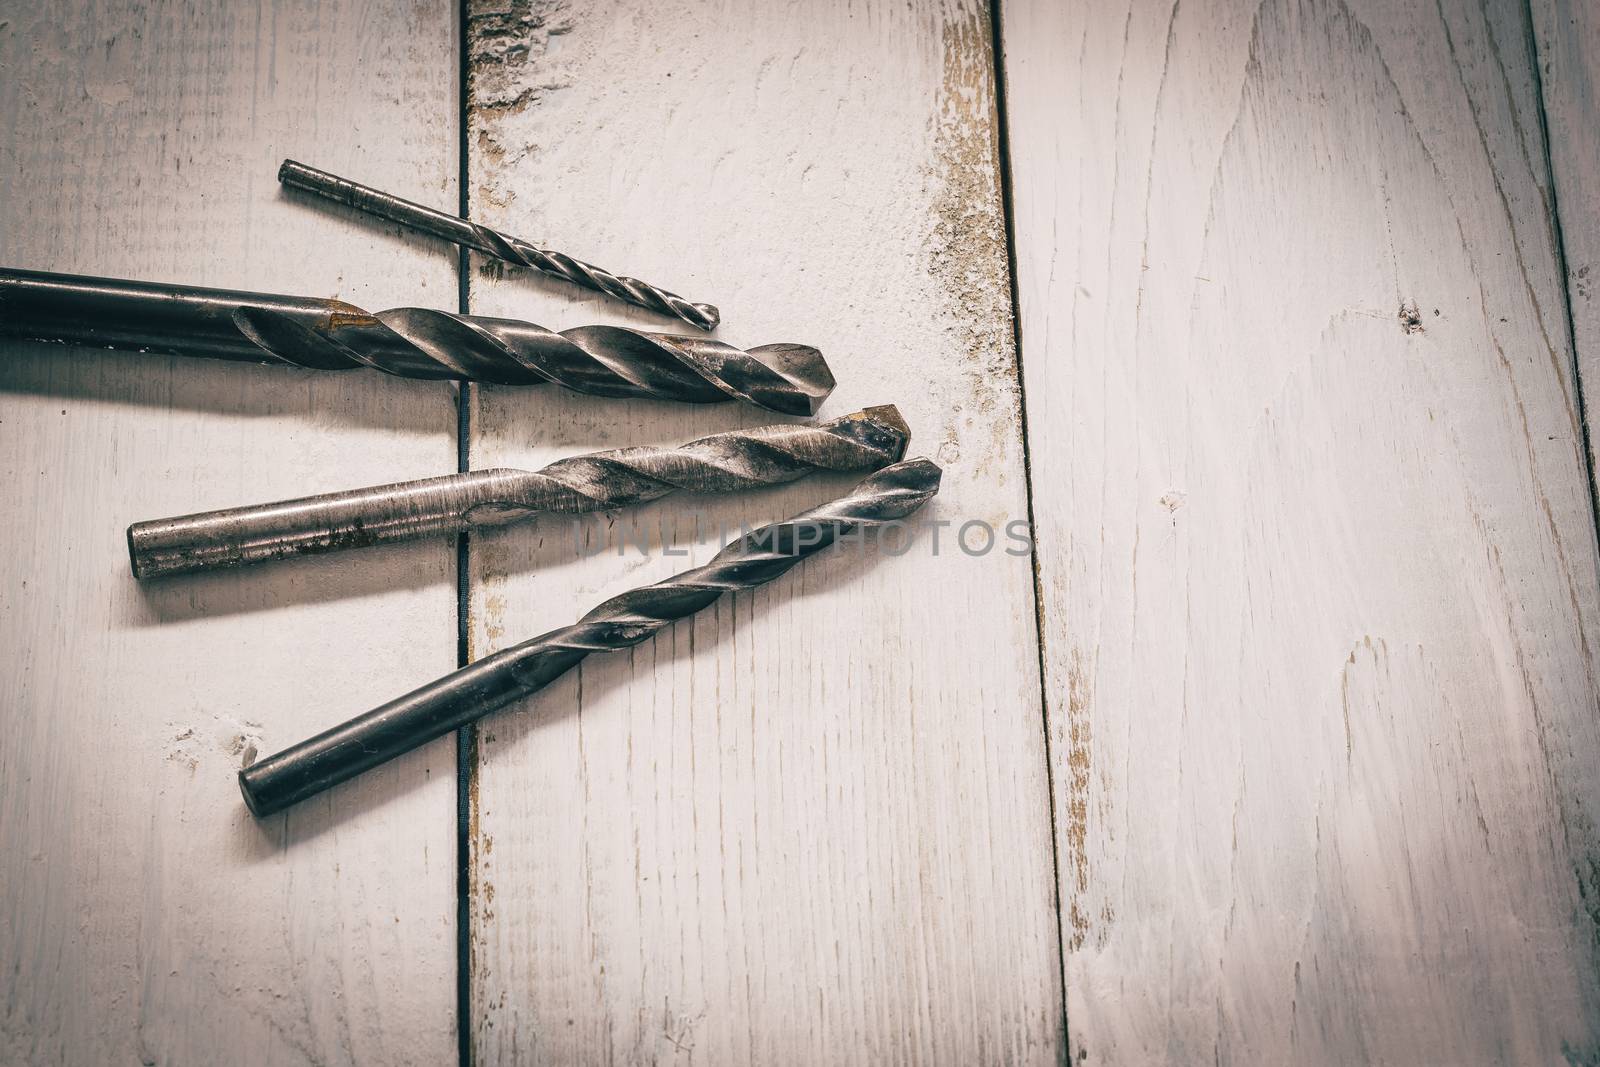 Group of  old oxide old tools.